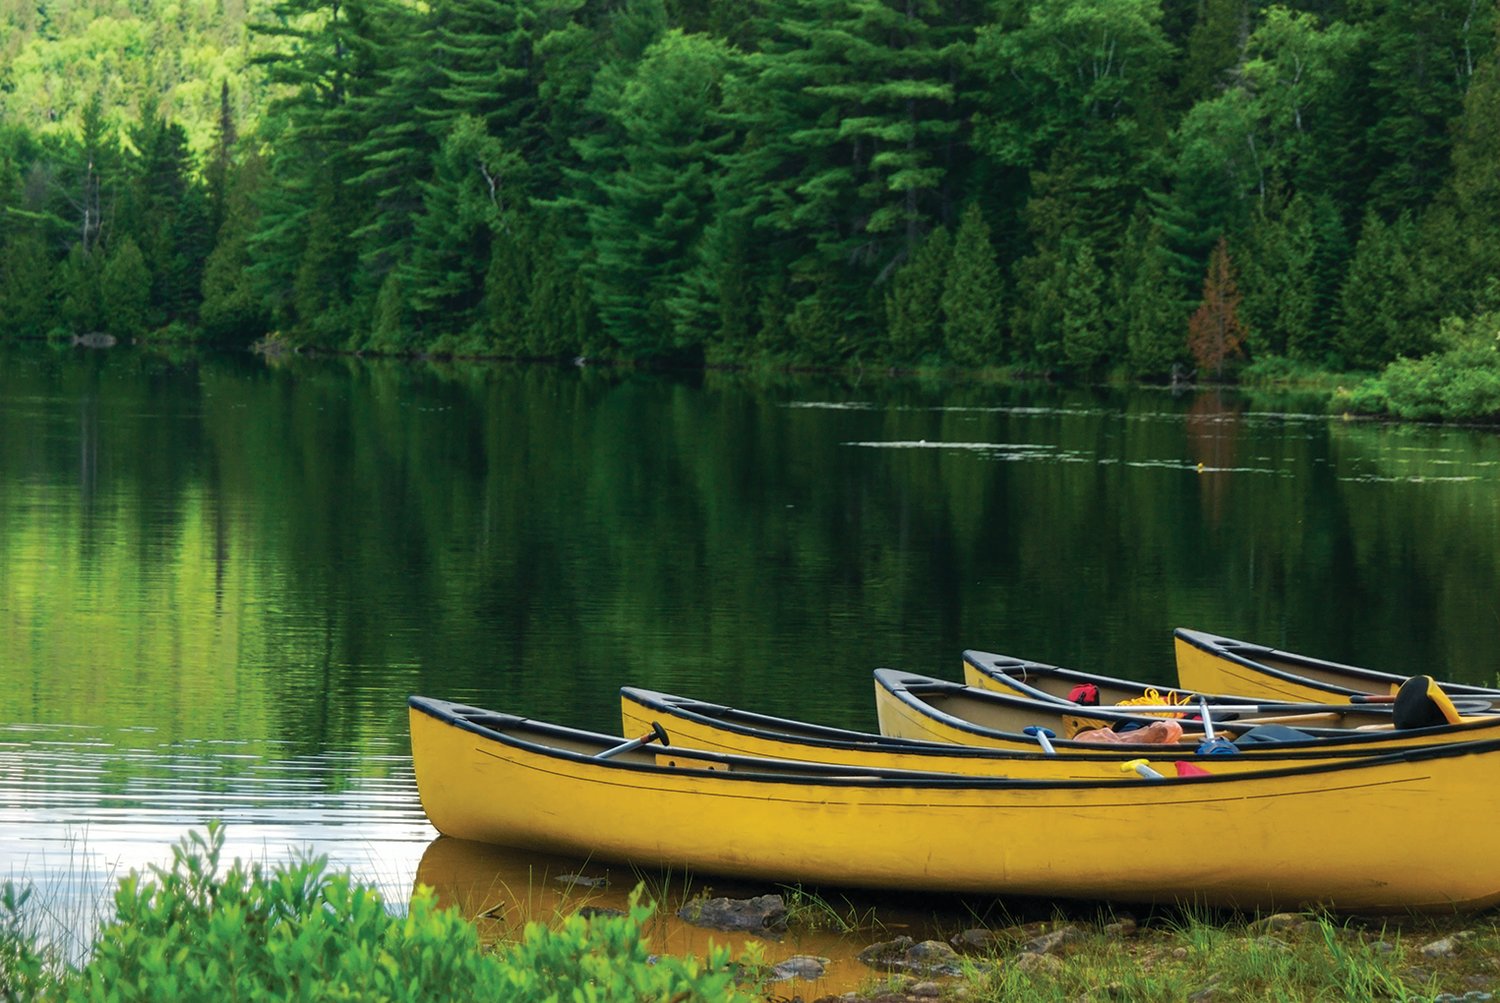 The Adirondack Canoe Classic, also known as the “90-Miler,” takes competitors from Old Forge to Saranac Lake. The event began today and will continue through Sunday afternoon. The course goes along the first 90 miles of the 740-mile Northern Forest Canoe Trail that stretches into northern Maine.